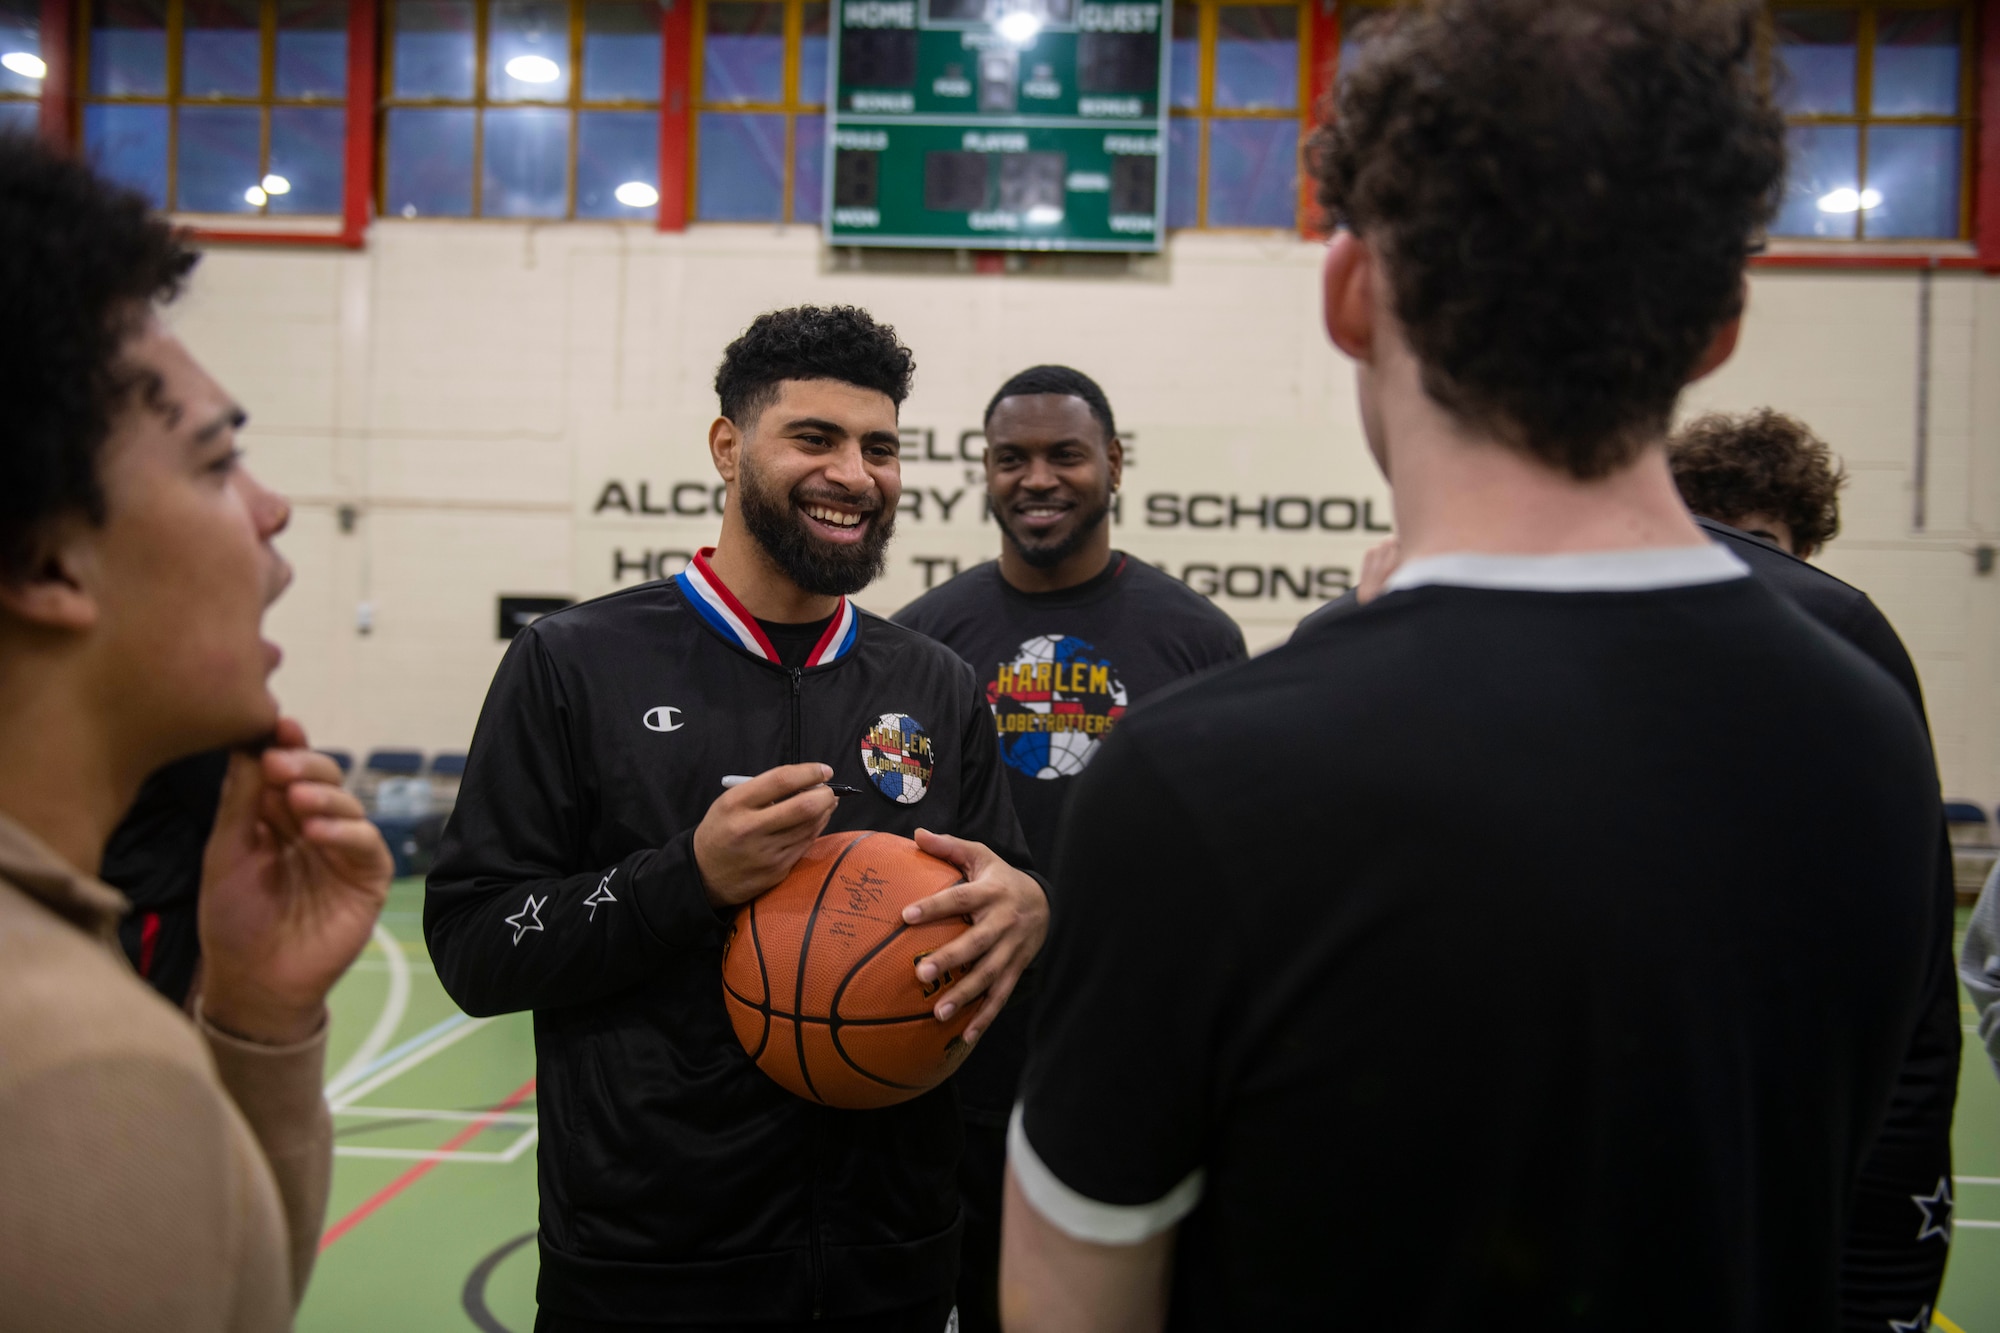 The Harlem Globetrotters meet with basketball players from RAF Alconbury Middle High School at RAF Alconbury